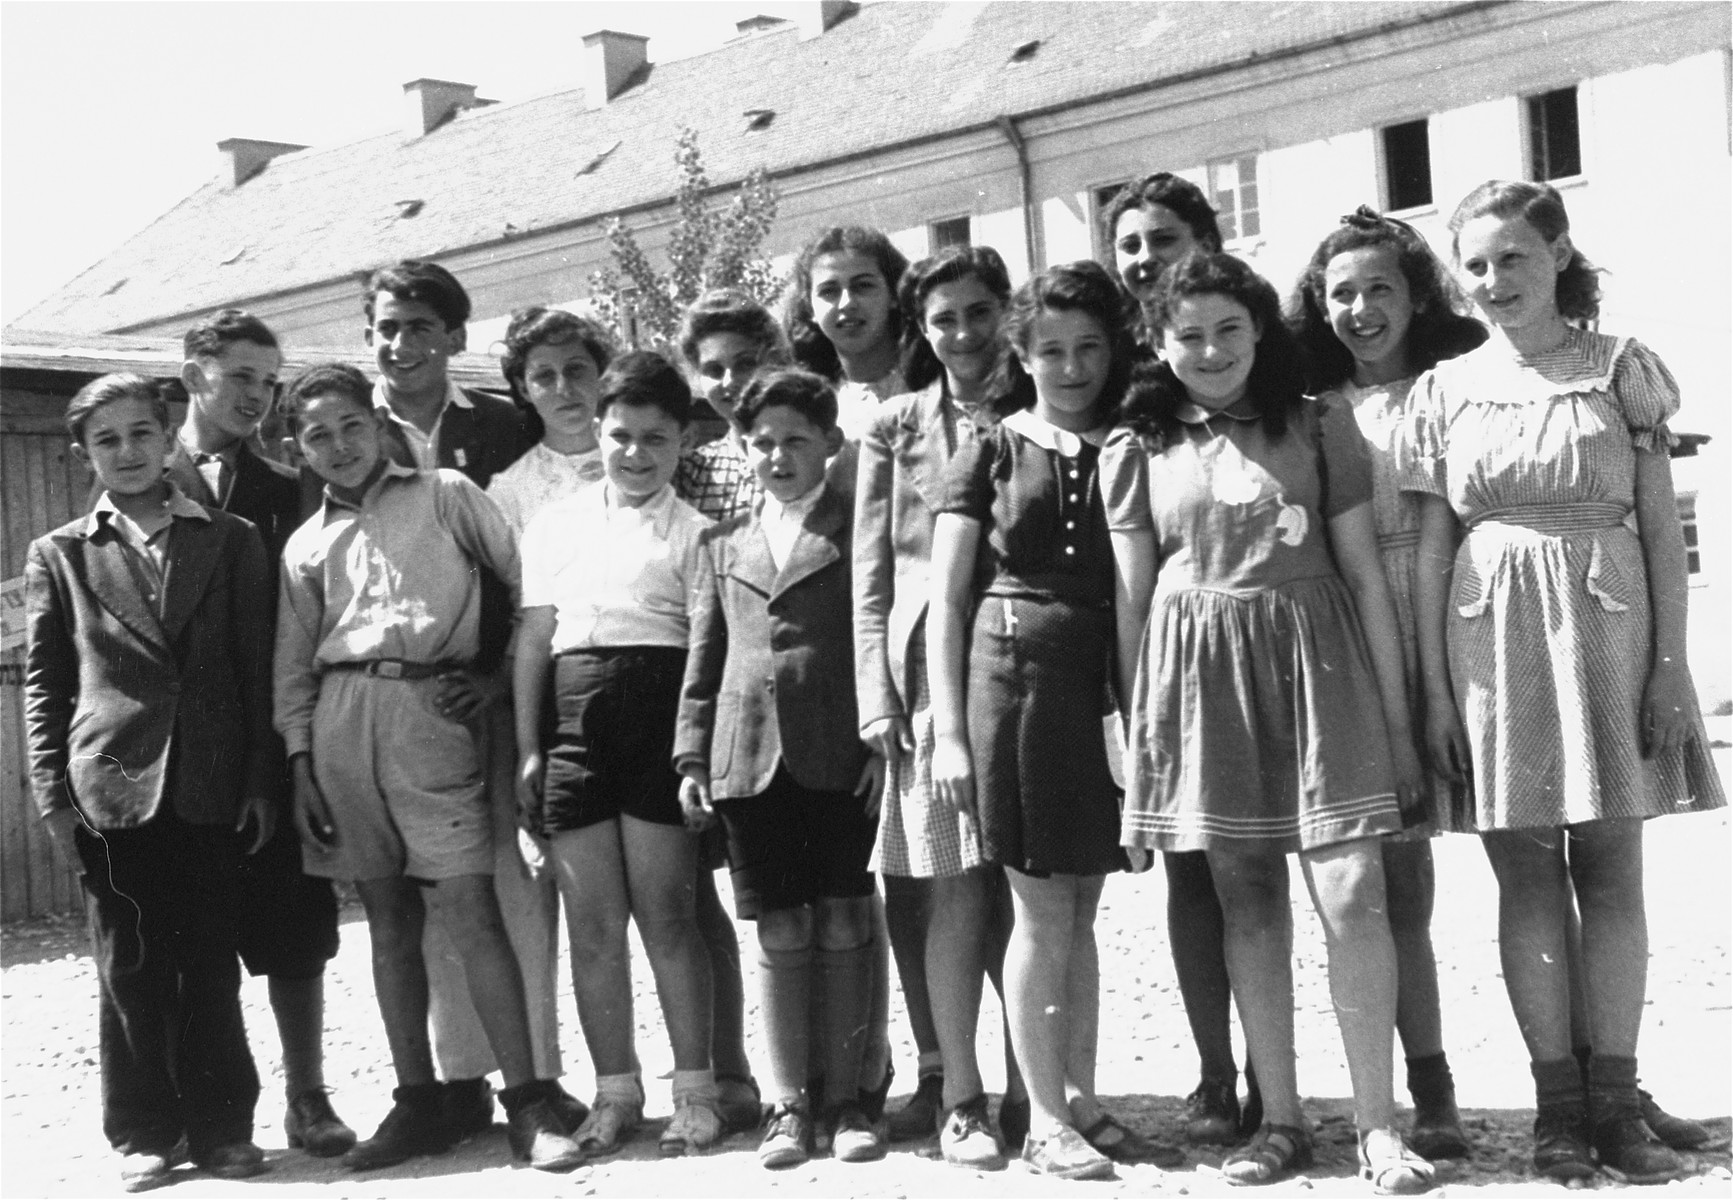 DP children in the Bindermichl DP camp.

Among those pictured is Pinja Blitt, the tallest boy in the back row, second from the left.  Also pictured is Tania Sendersky (front row, wearing a black dress).  She is the daughter of Eva and Ralph Sendersky of Kiev.  Pictured sixth from the right is Laura Chomut (Oberlander).  Seventh from the right (in back) is Leila Kornbluth.  Eighth from the right (in front, wearing short pants) is Tuli Bricks ( later  Dr. Nathan Bricks).